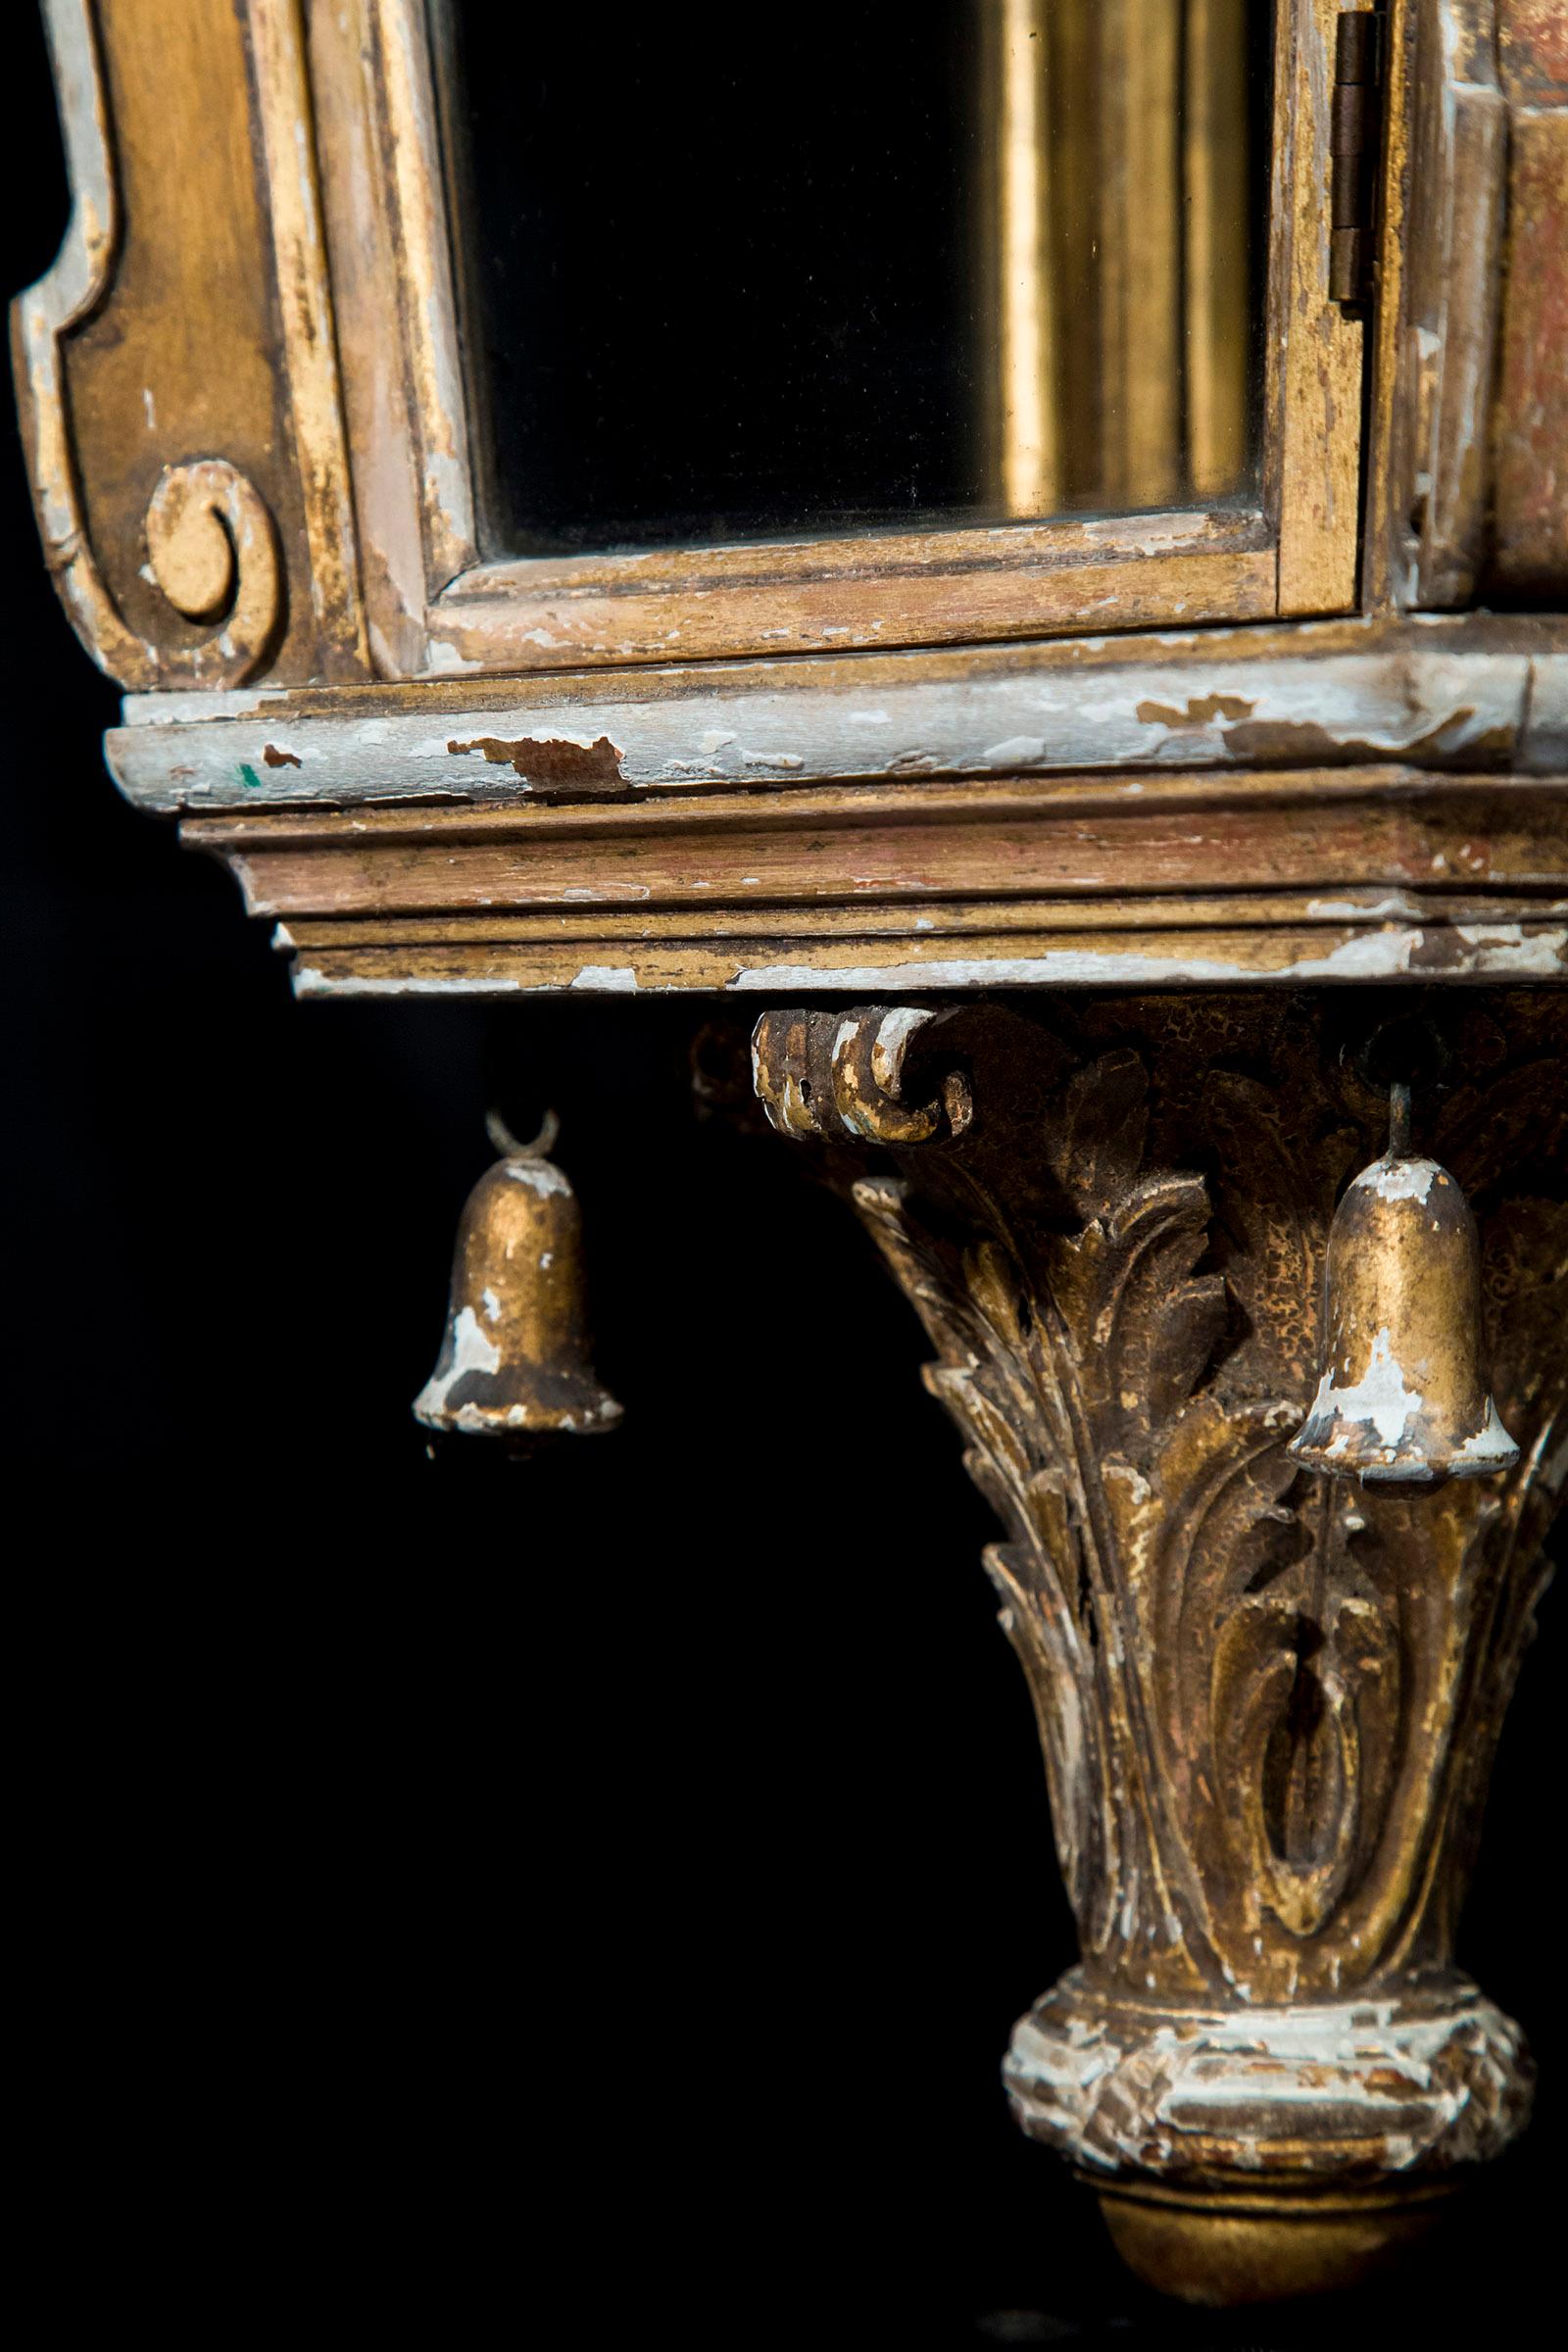 A stunning carved and gilt gesso hall lantern, in the Louis XVI neoclassical style.
France, late 19th century.

Dimensions:
Height 33.5 in / 85 cm
Width 13.75 in / 35 cm

Why we love it

Its crisp, exquisite neoclassical decoration looks absolutely